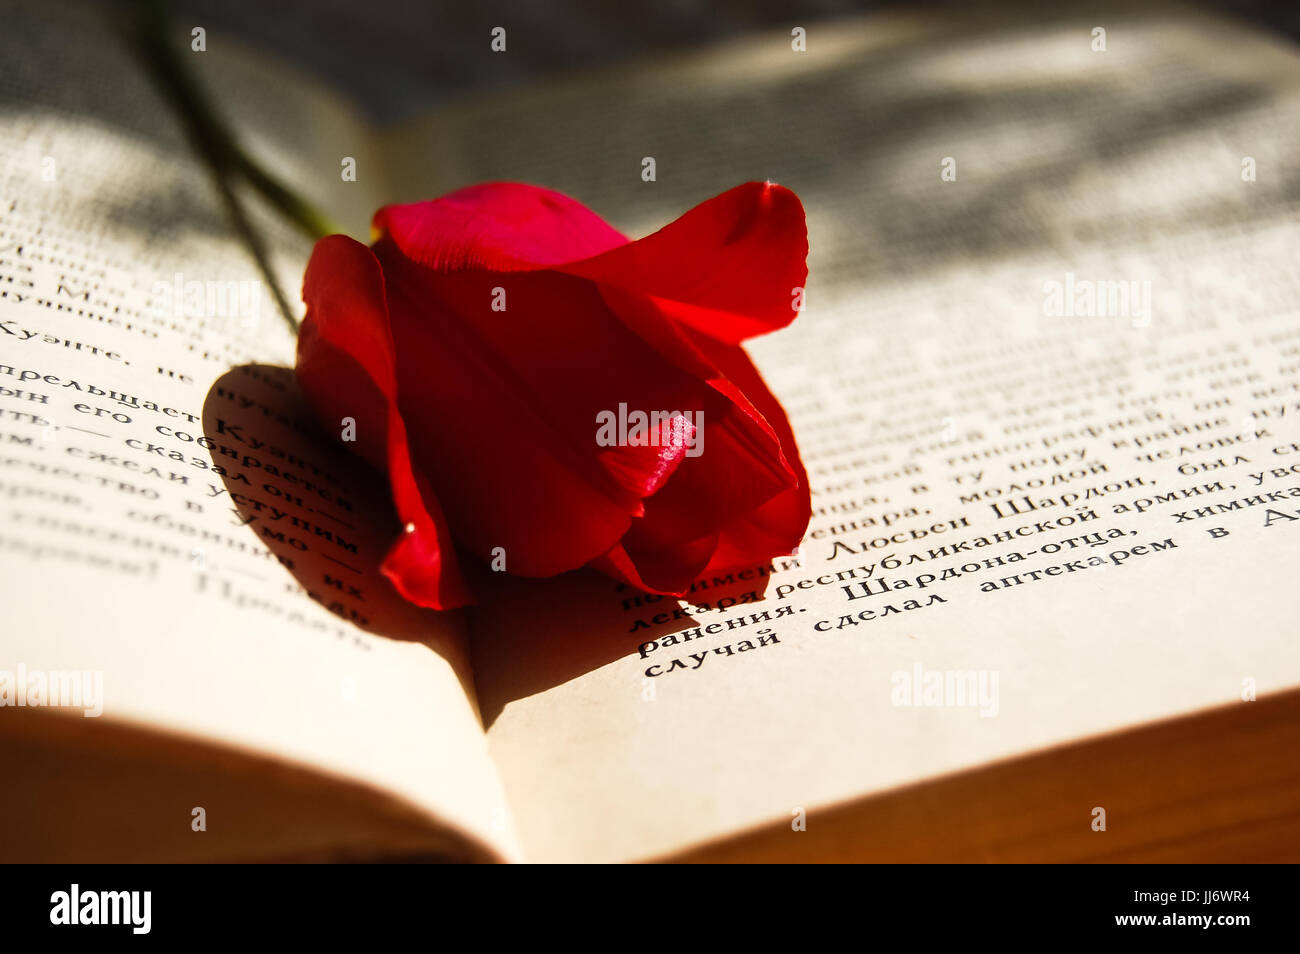 One red tulip in a opened book, romantic background Stock Photo